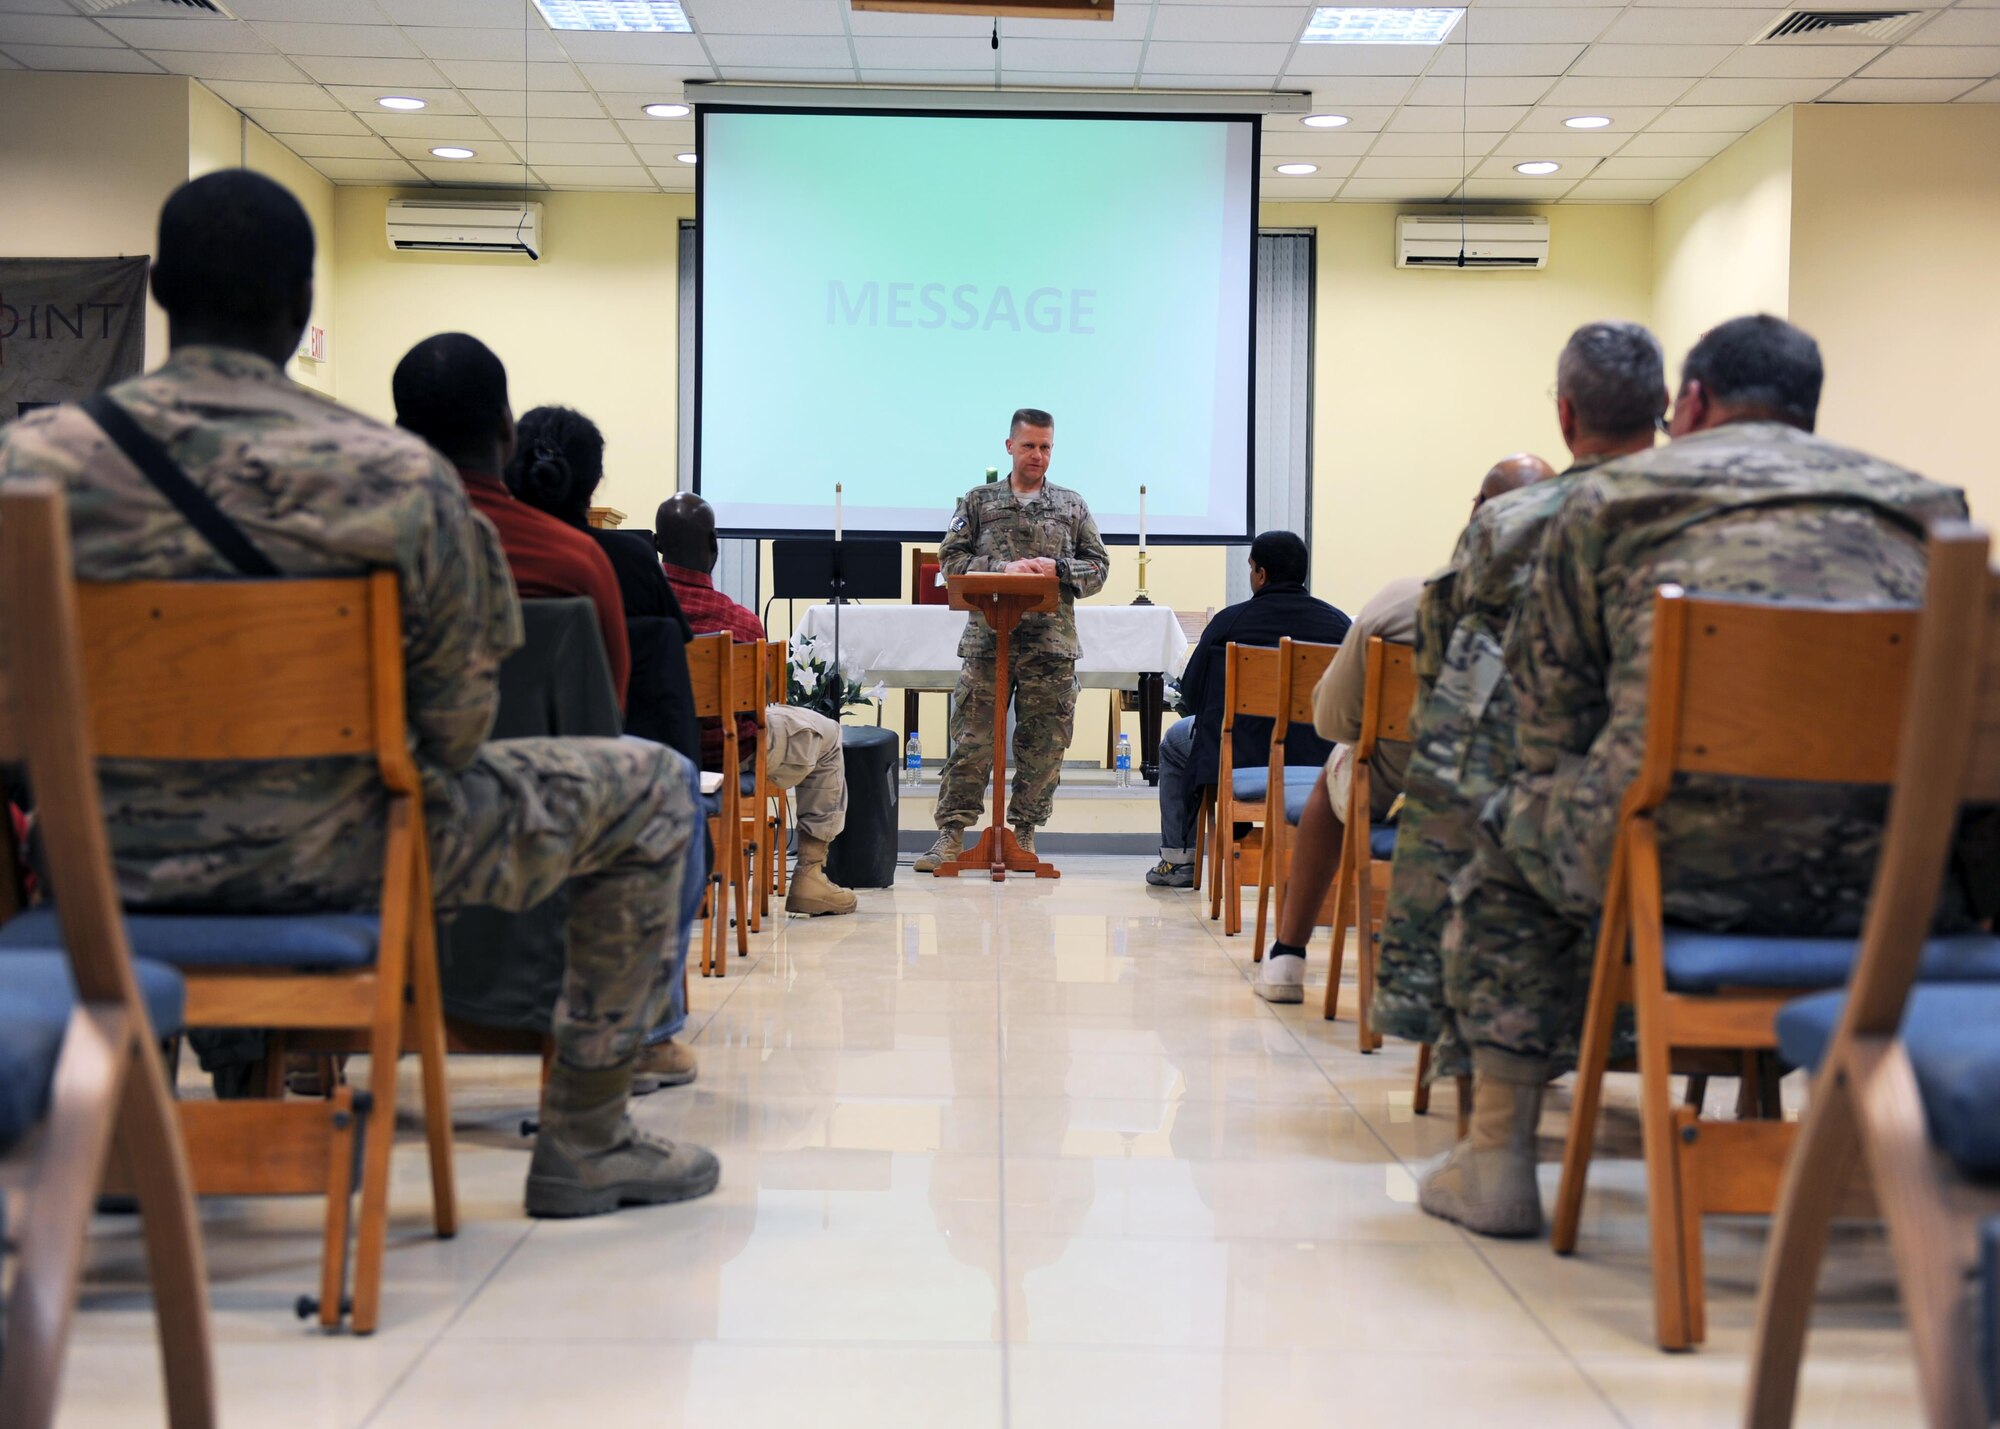 U.S. Air Force Maj. William Braswell, 455th Air Expeditionary Wing chaplain, speaks during an evening church service during a Religious Support Team visit Feb. 15, 2015 at Hamid Karzai International Airport in Kabul. Braswell, accompanied by U.S. Air Force Tech. Sgt. Aleric Hebert, 455 AEW chaplain assistant, travels throughout the U.S. Air Force Central Command Area of Responsibility engaging with Airmen and conducting church services to ensure deployed servicemembers are spiritually fit to fight.(U.S. Air Force photo by Staff Sgt. Whitney Amstutz/released)